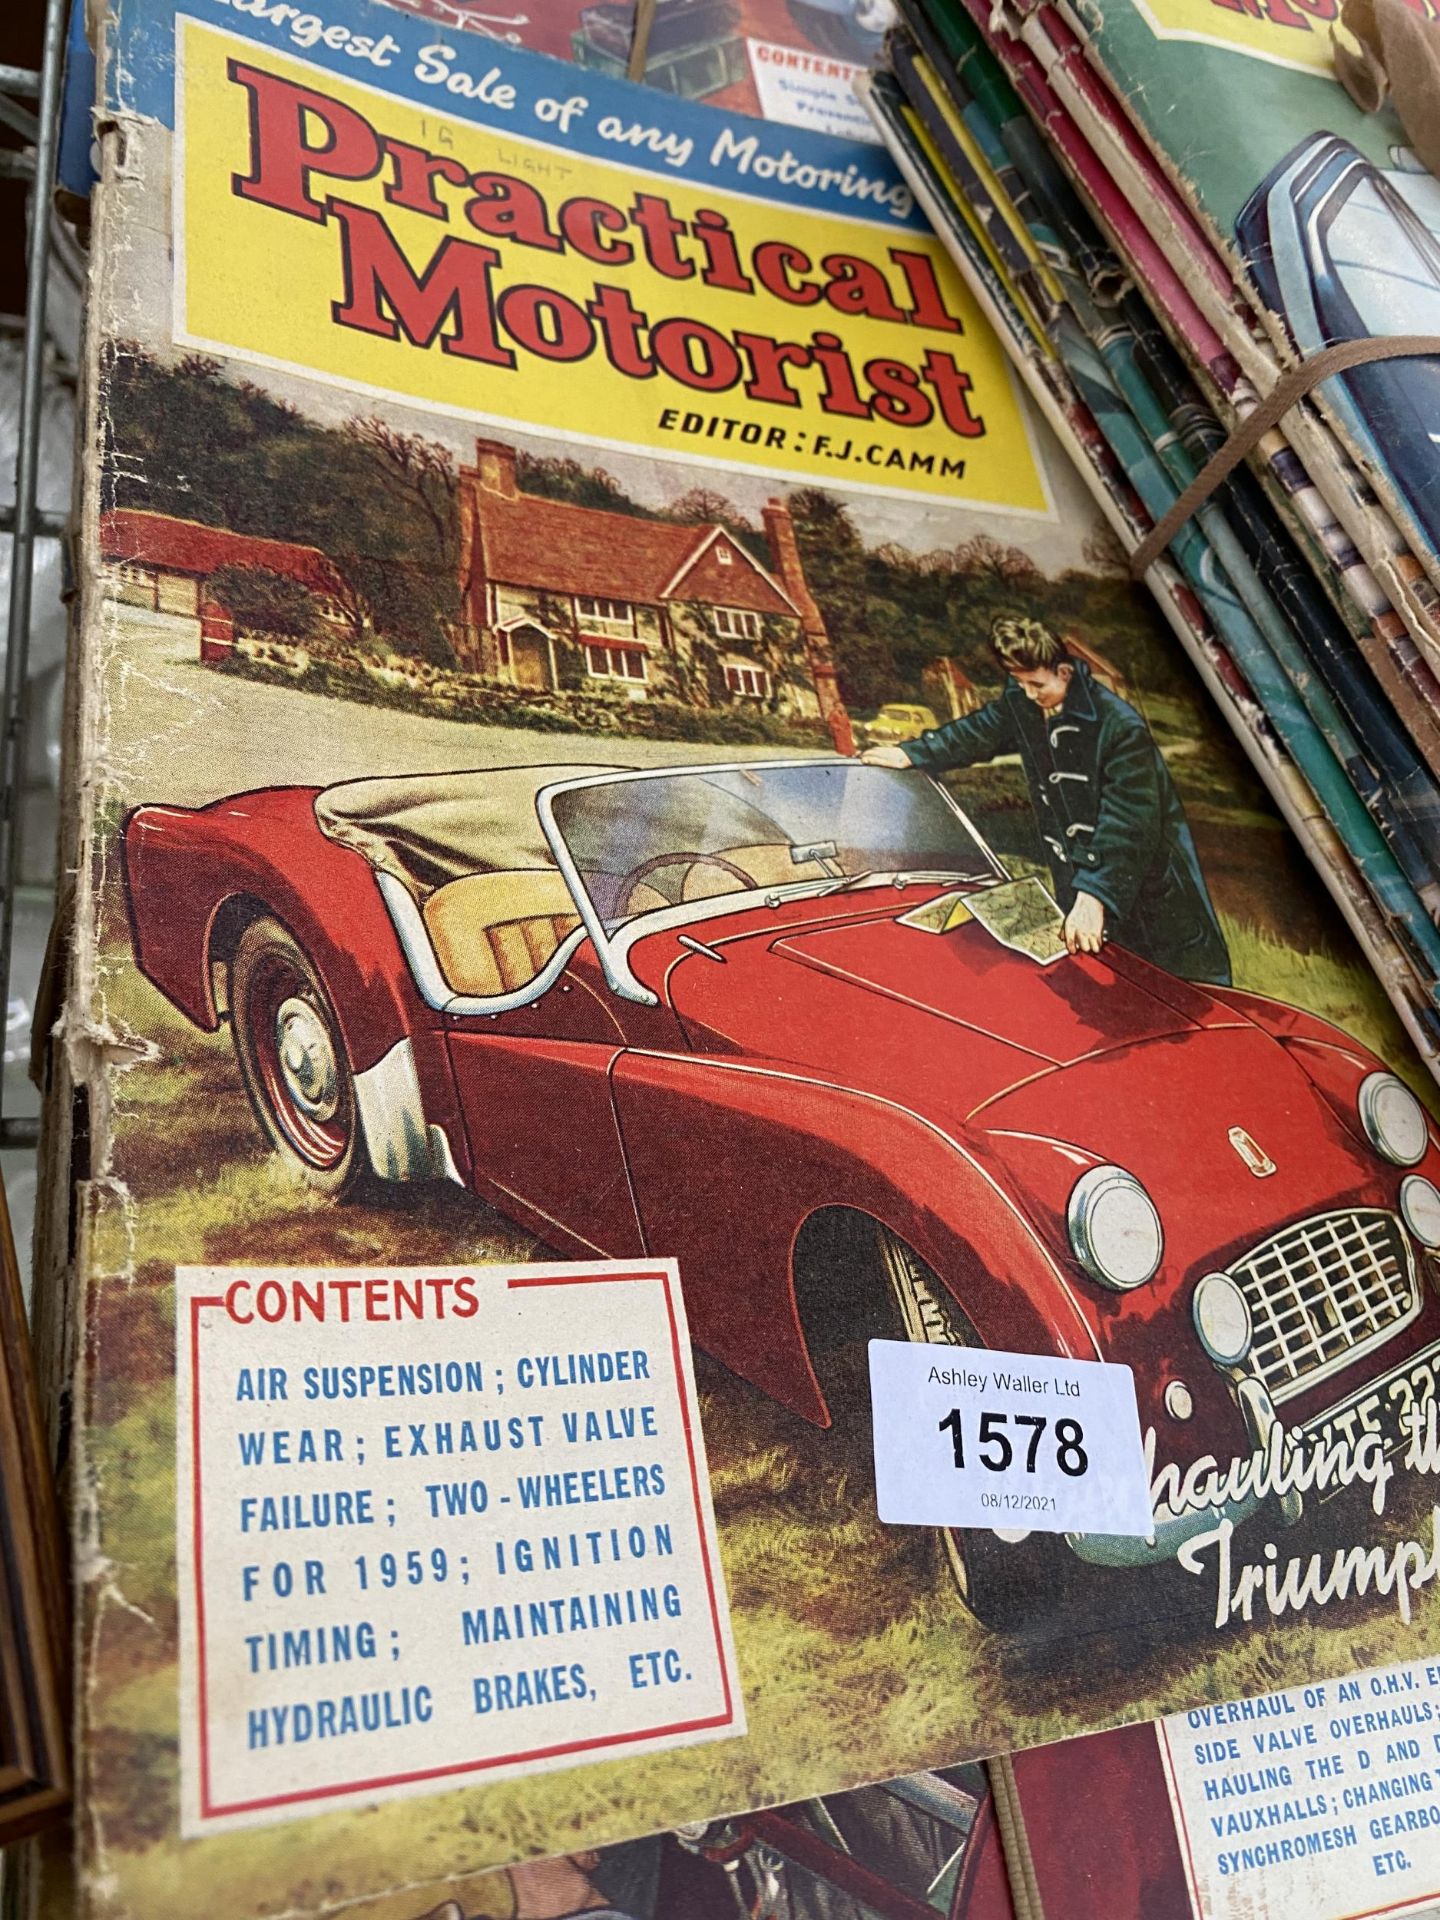 A LARGE COLLECTION OF VINTAGE PRACTICAL MOTORIST MAGAZINES - Image 2 of 4